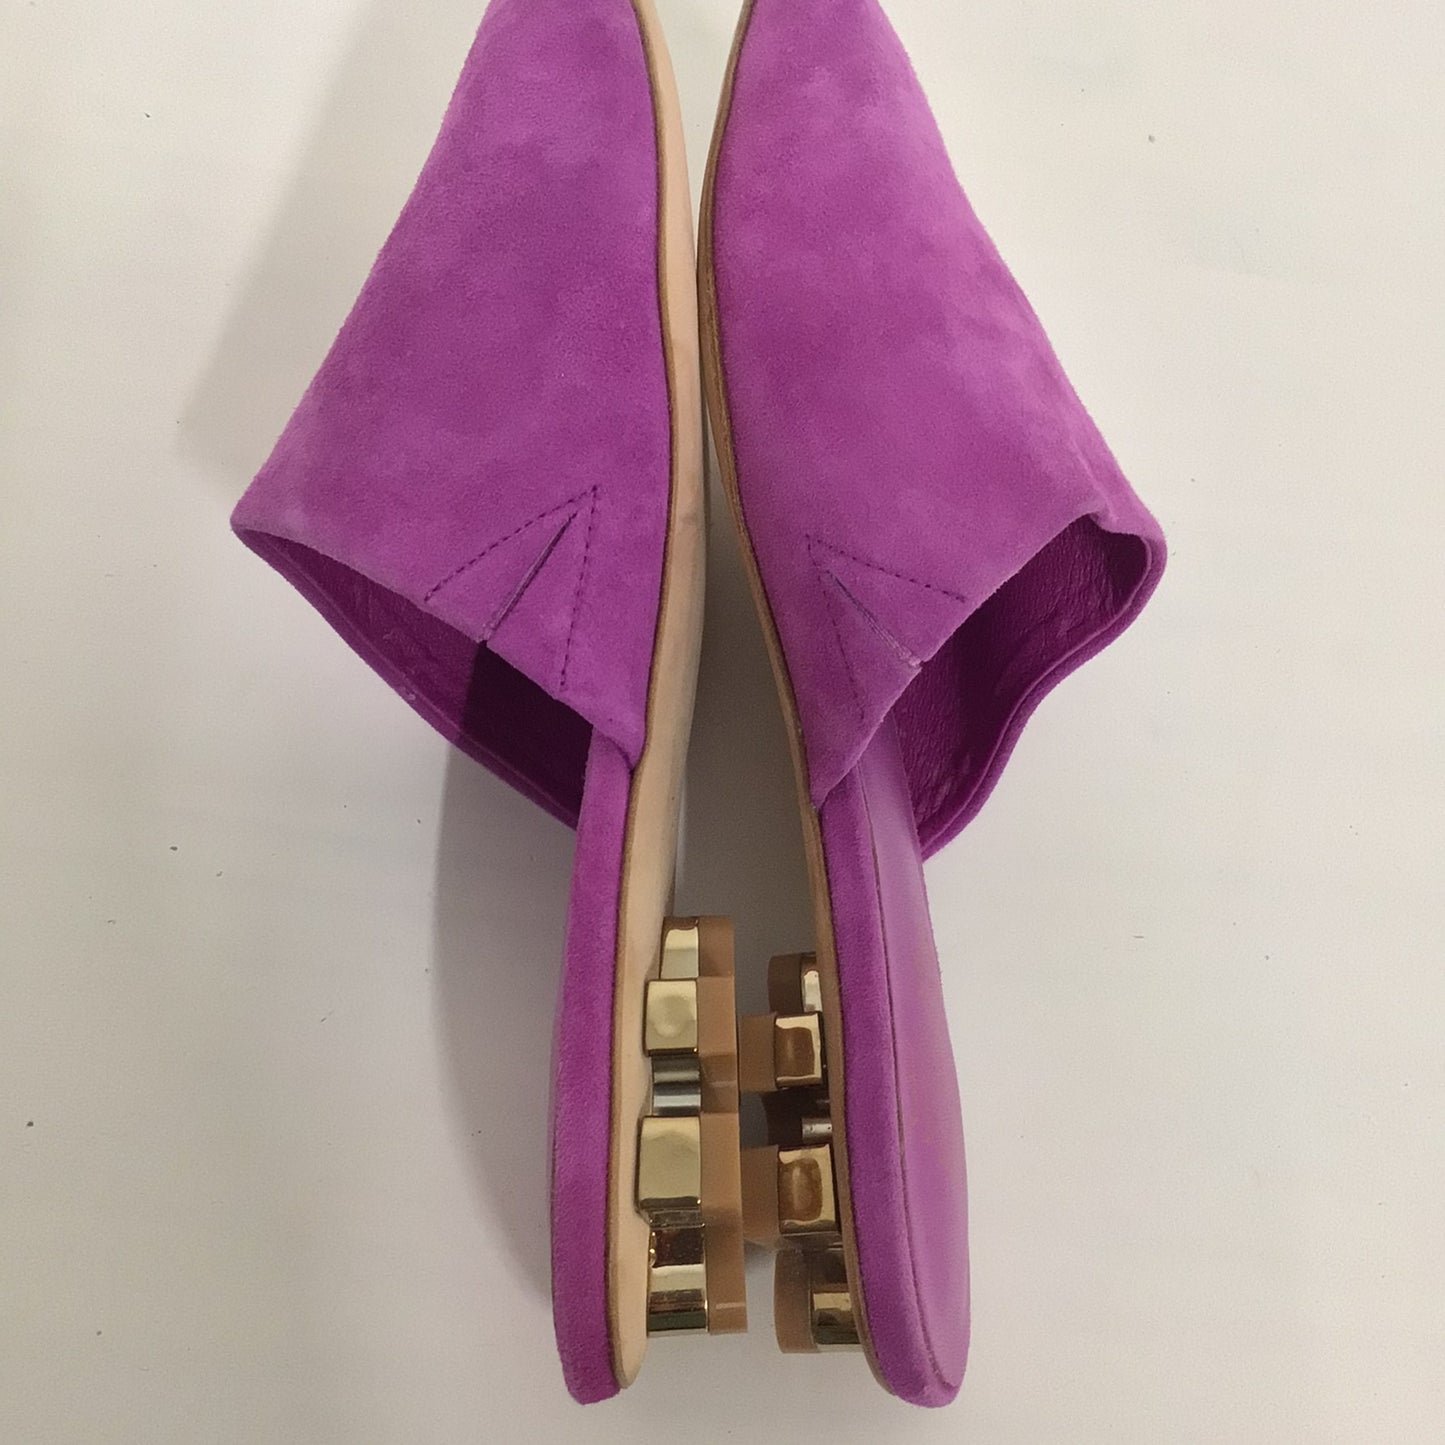 Charlotte Stone Magenta Pink Puzzle Heel Slides Suede Leather Size 5